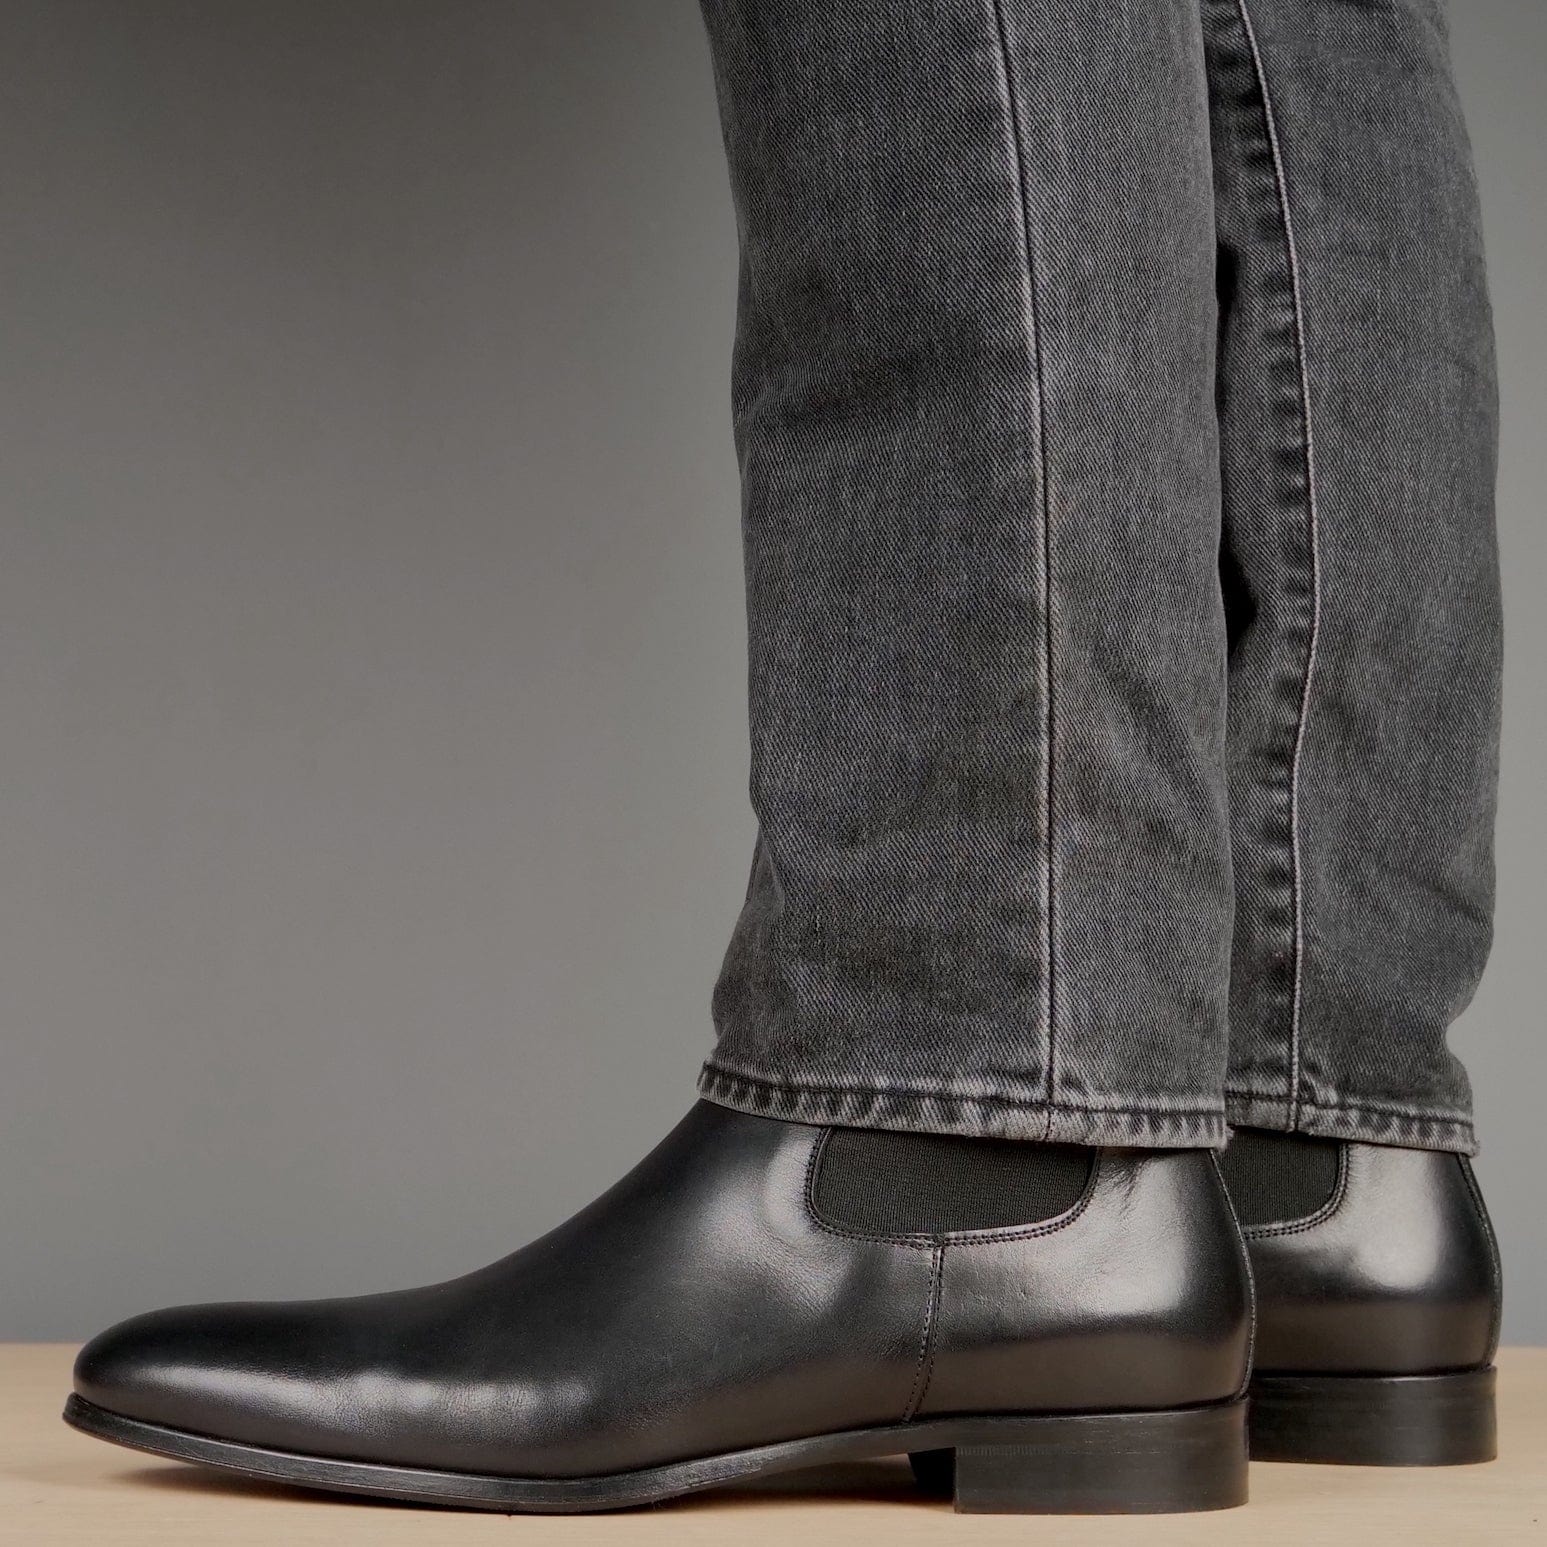 A Quick Guide To Choosing the Perfect Pair Of Men's Chelsea Boots